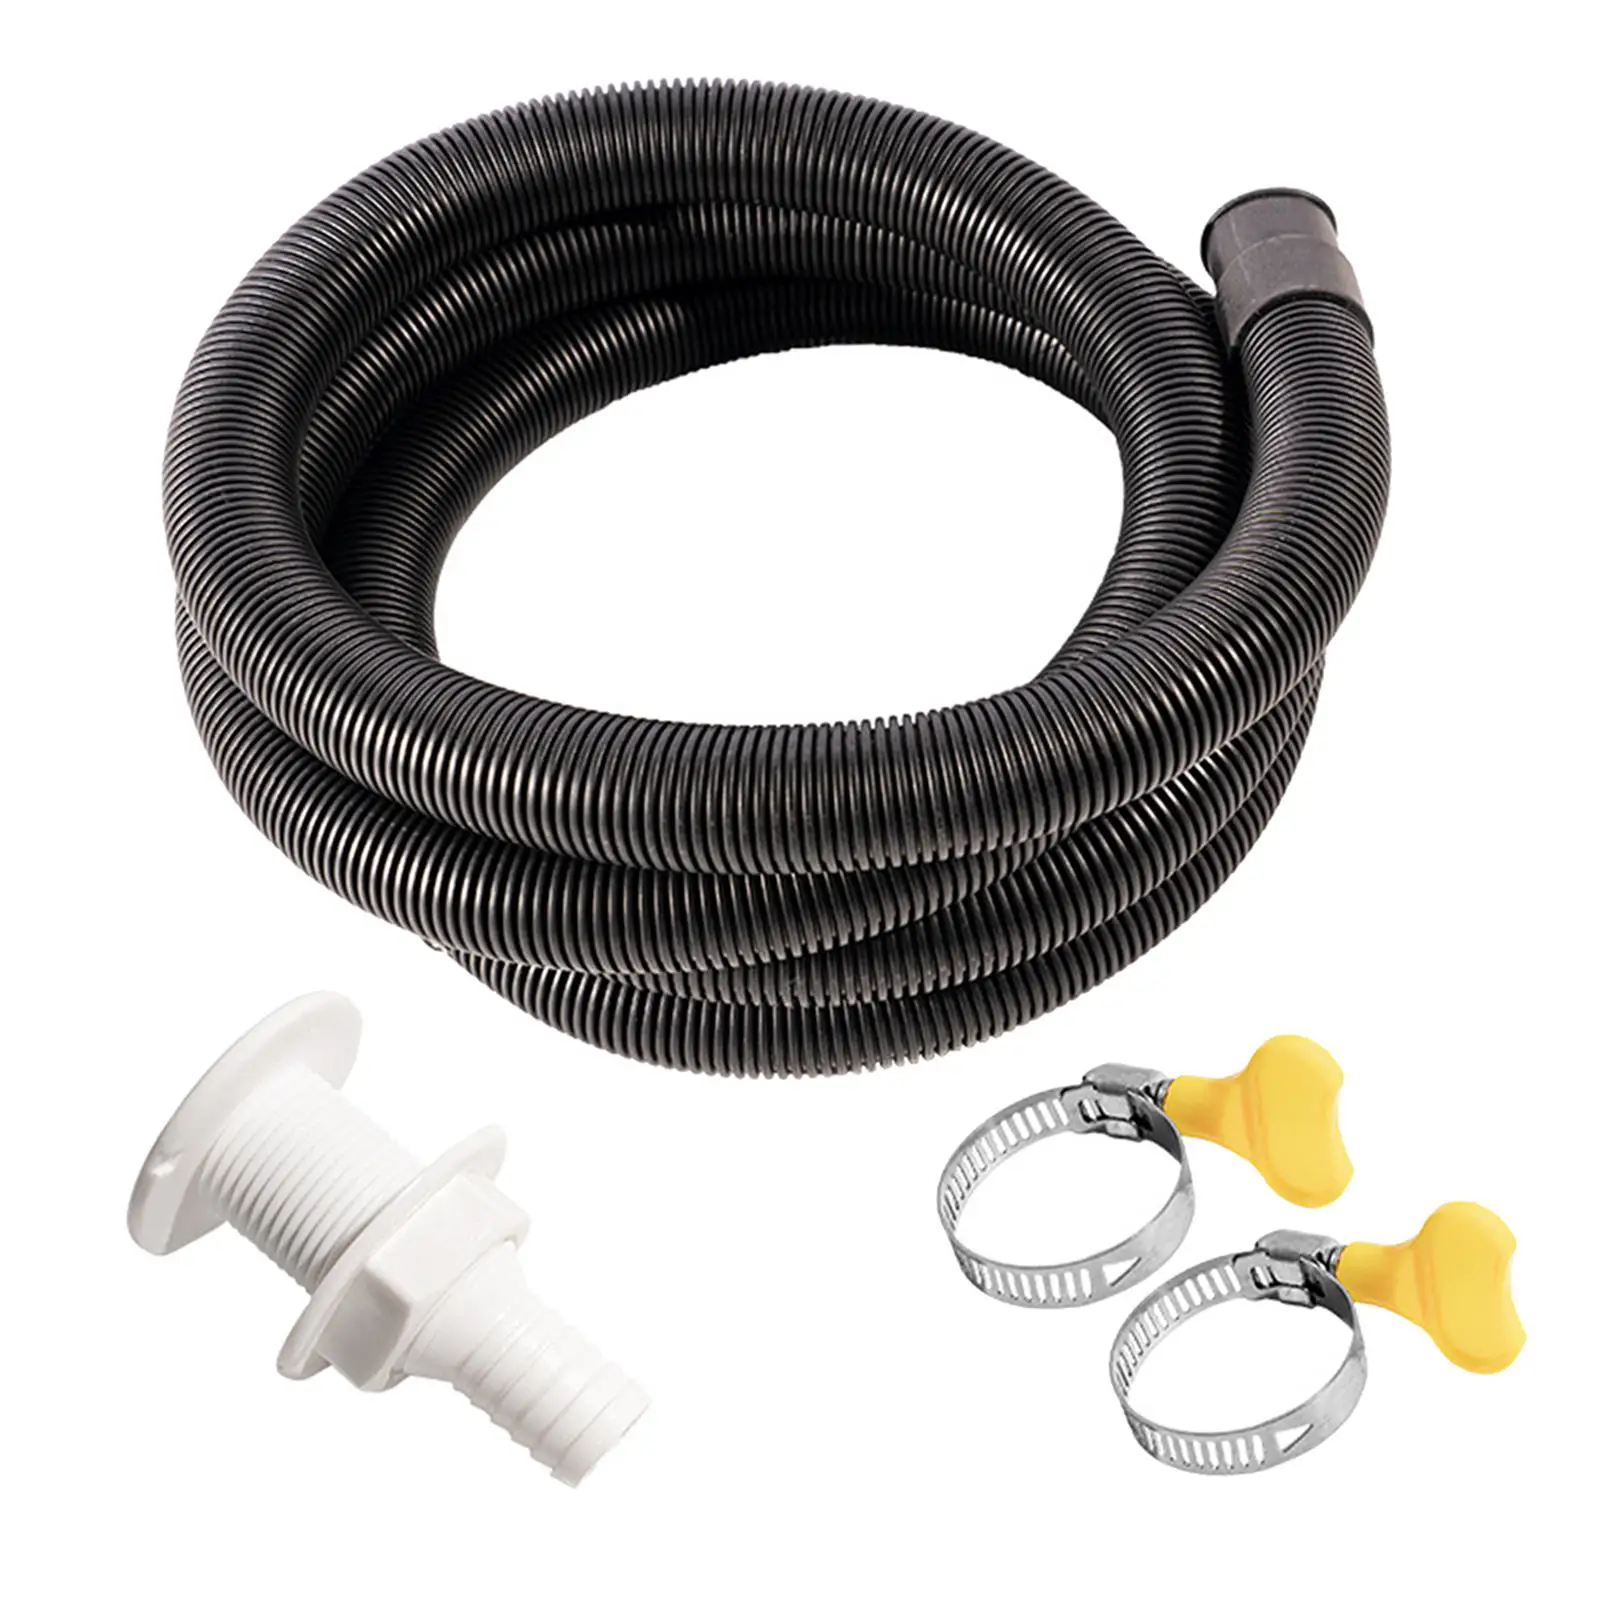 Bilge Pump Hose Installation Kit 6.6 FT Hose Plumbing Kit Includes 2 Hose Clamps and Thru-Hull Fitting for 3/4 Inch Outlets